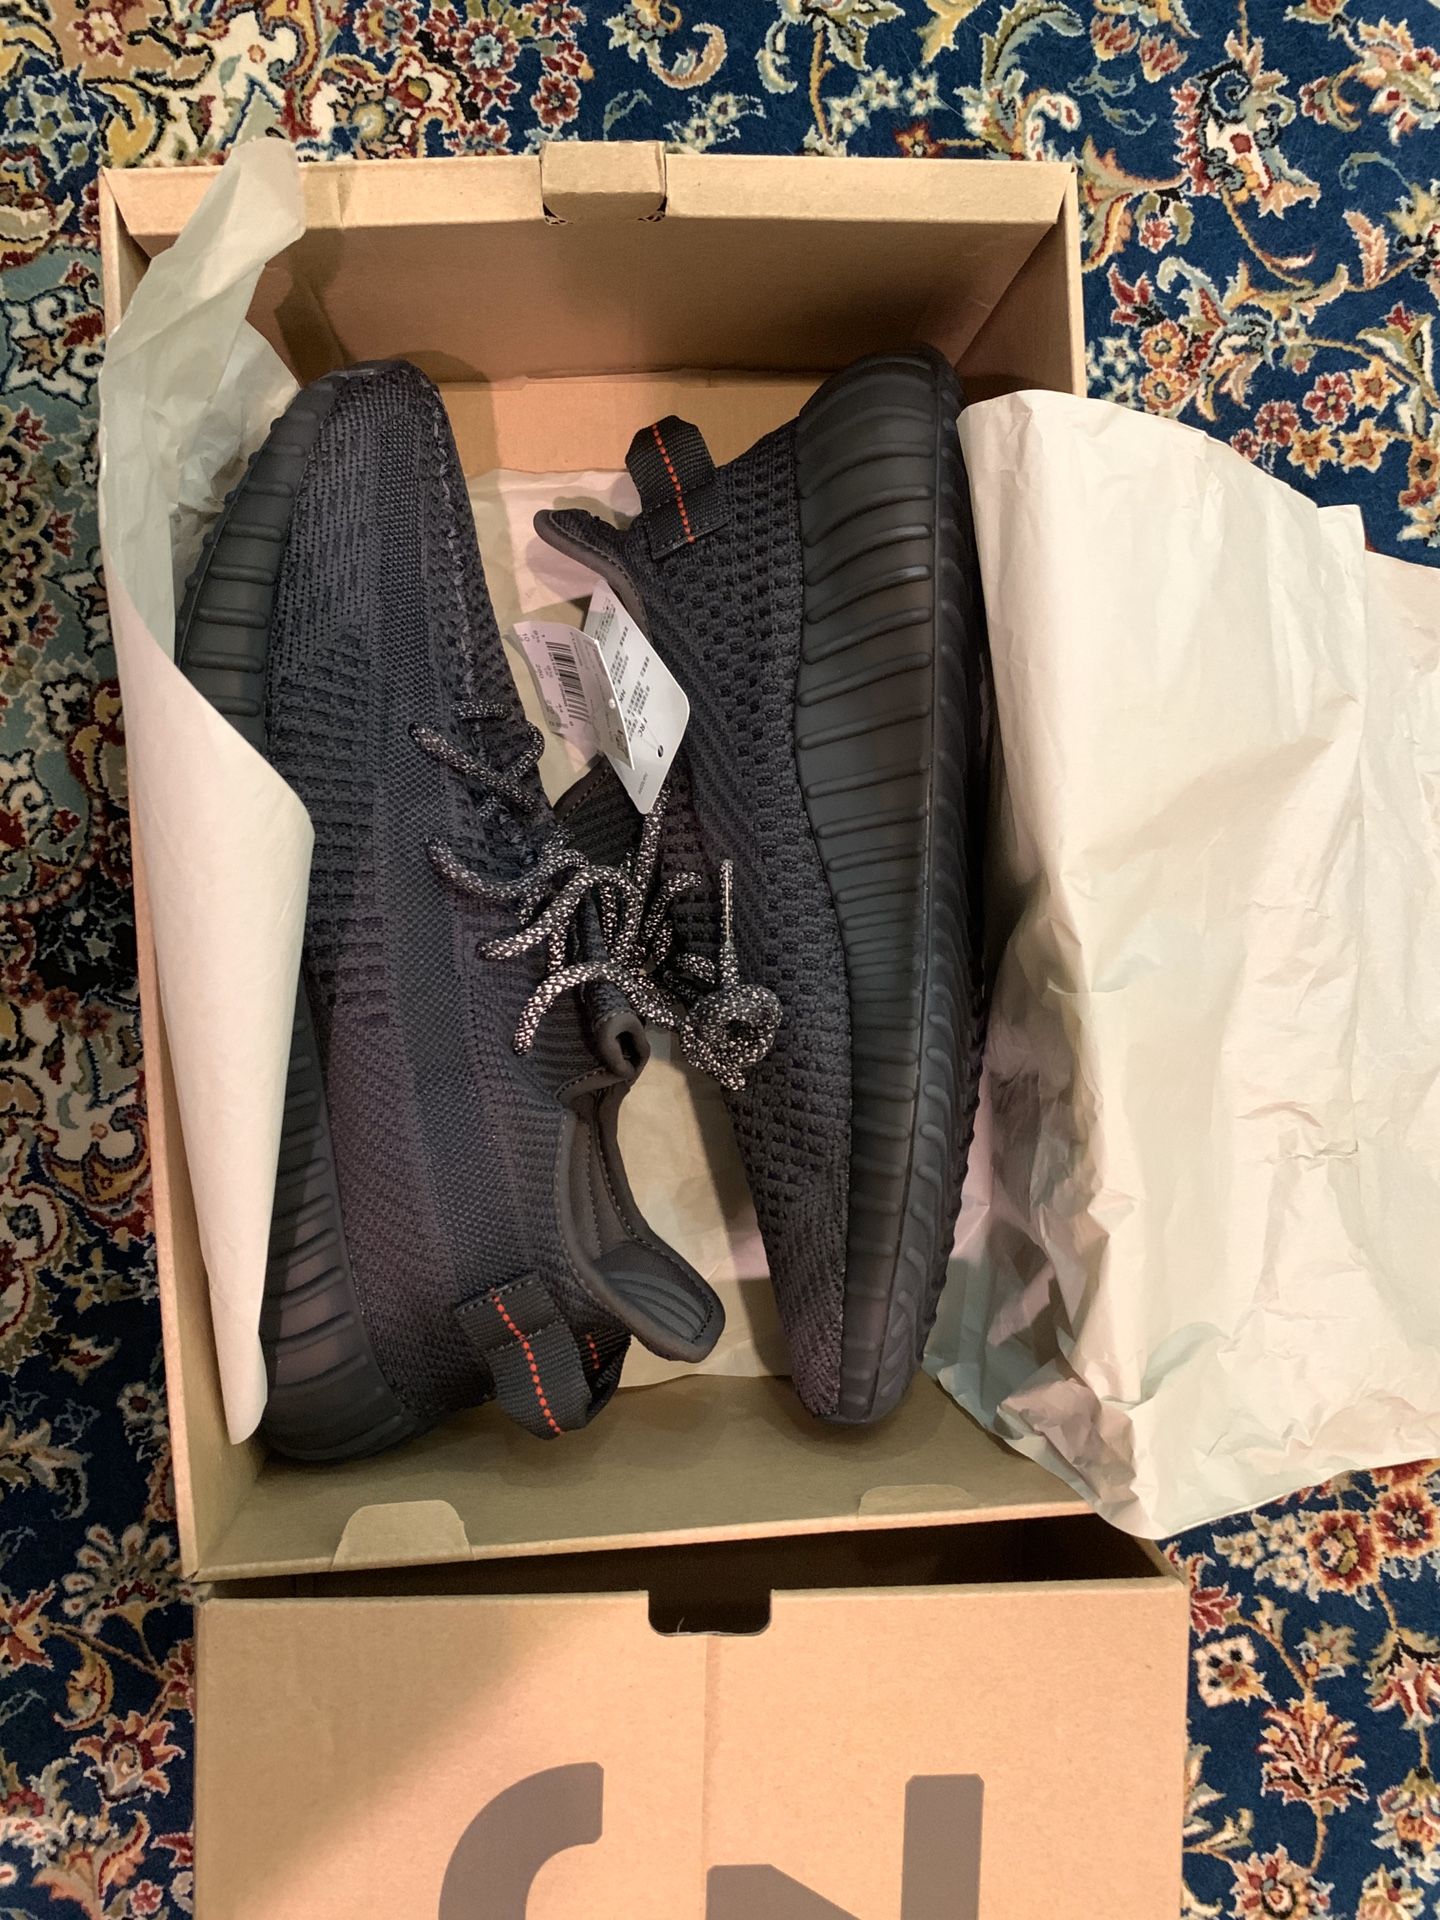 Yeezy Boost 350 V2 Black Non-Reflective size 10 Authentic with tags